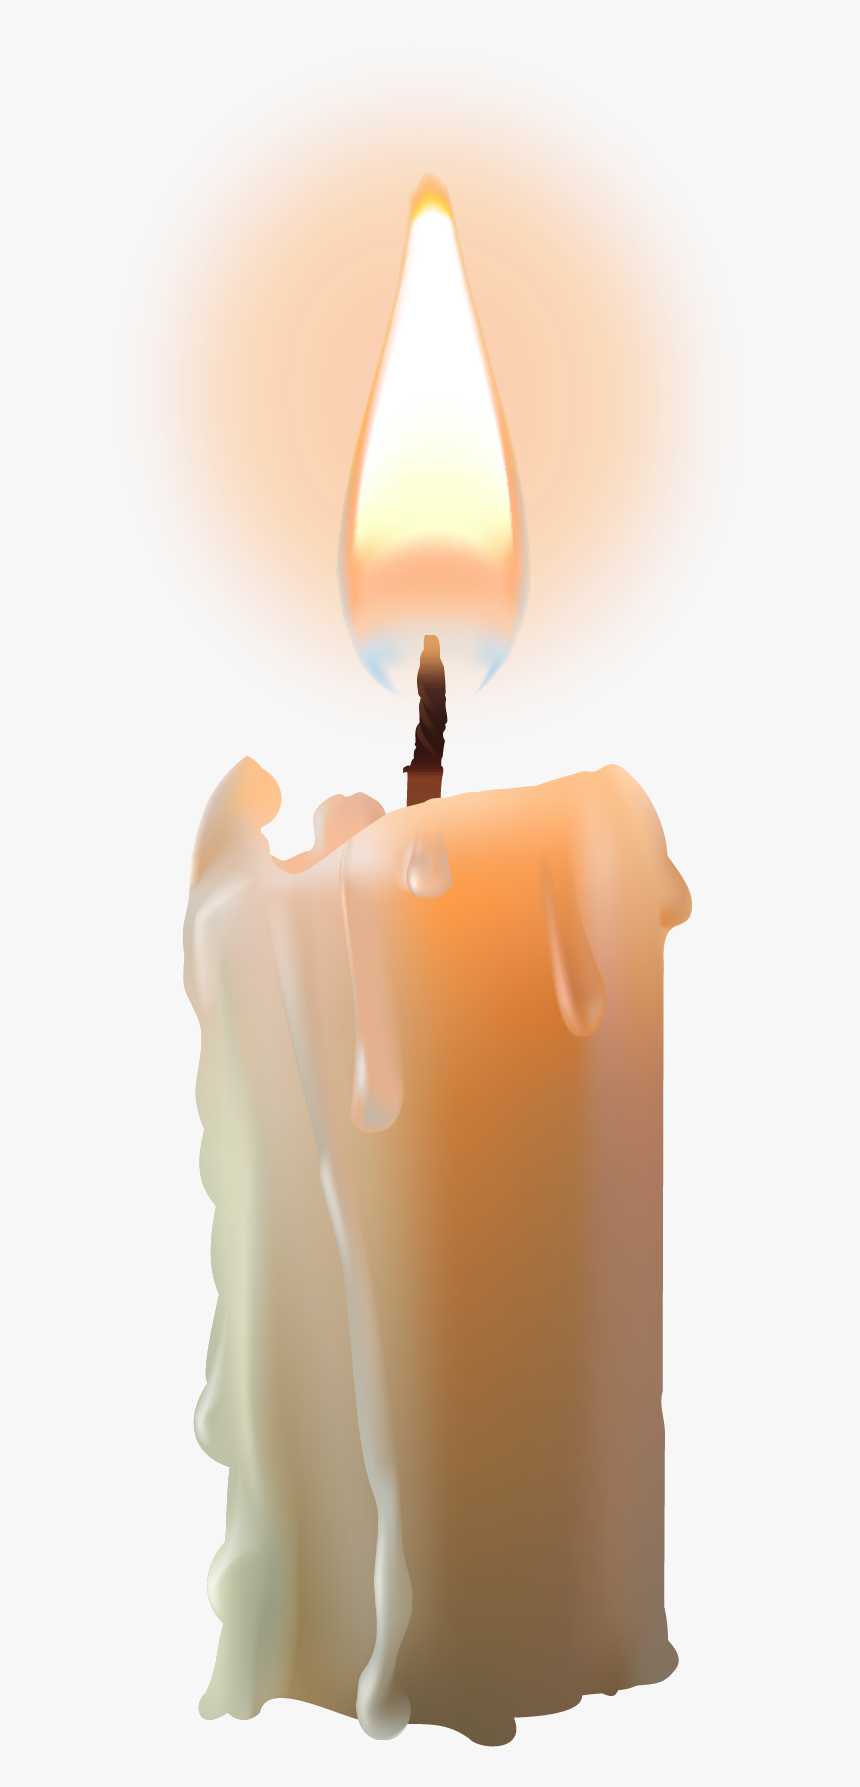 Bright Candle With Flame Png Image - Candle & Flame Png, Transparent Png, Free Download